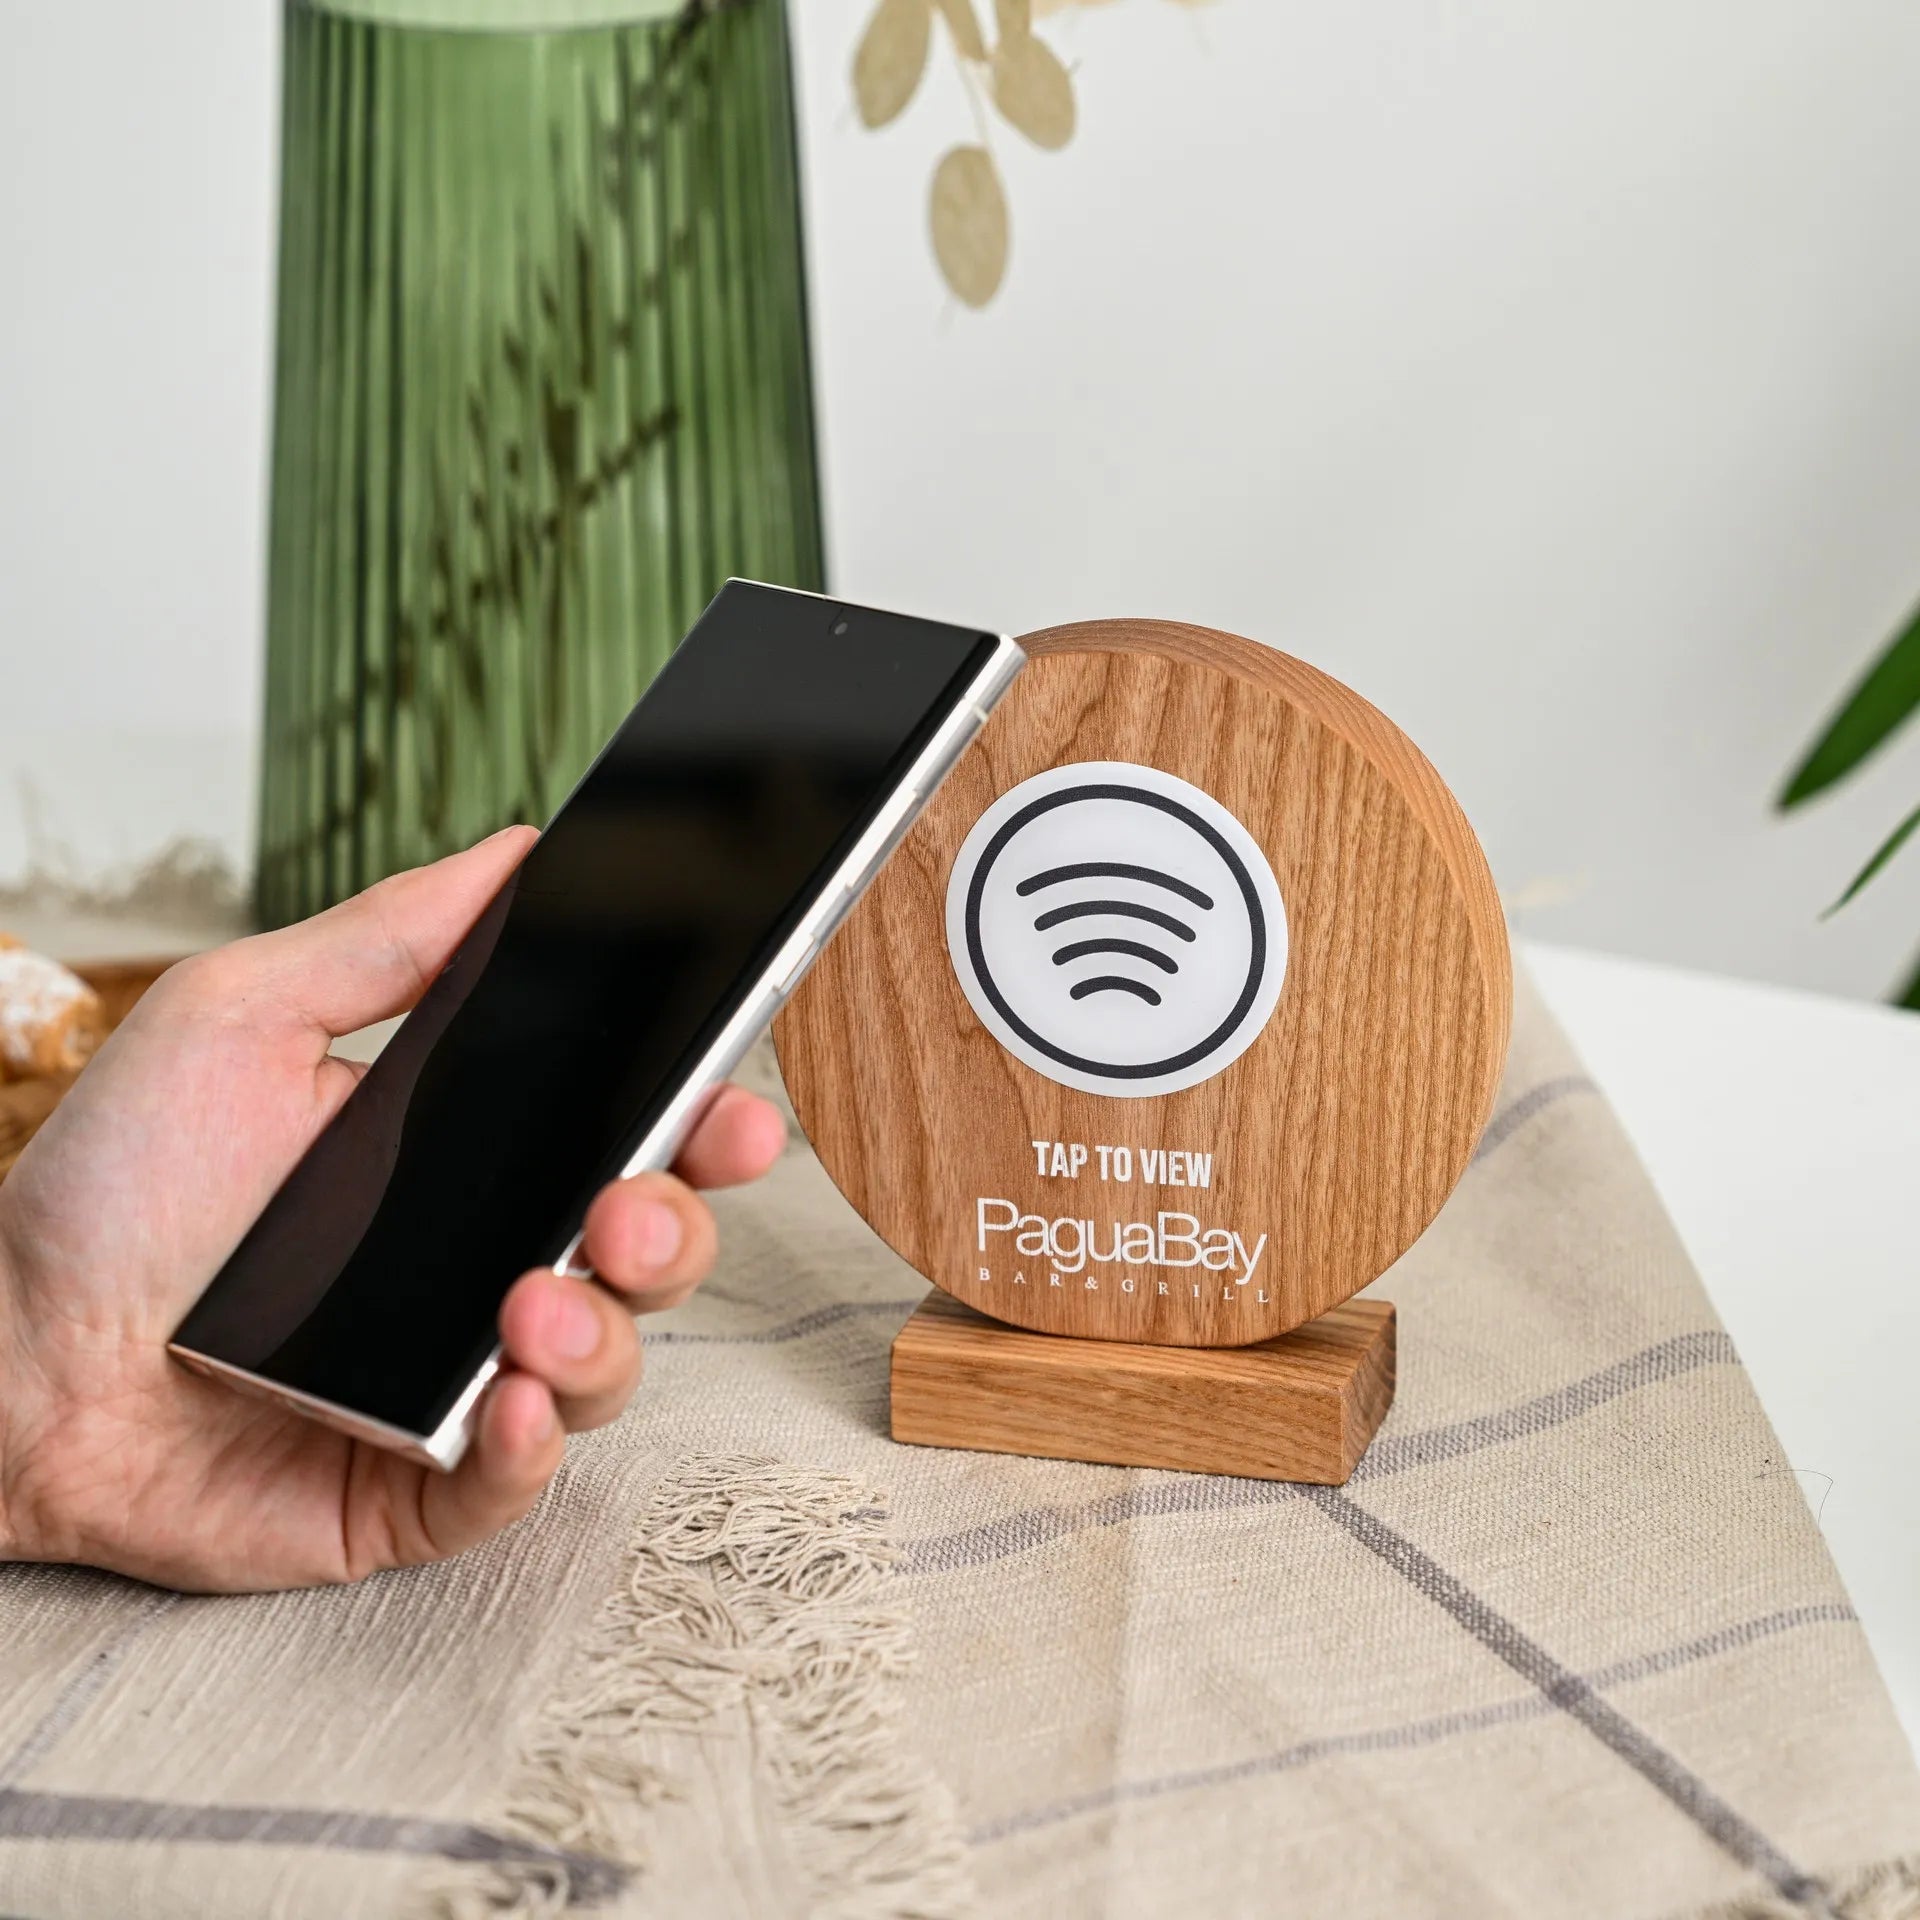 Personalize your payment experience with our custom NFC tap to pay sign, tailored to your brand and preferences